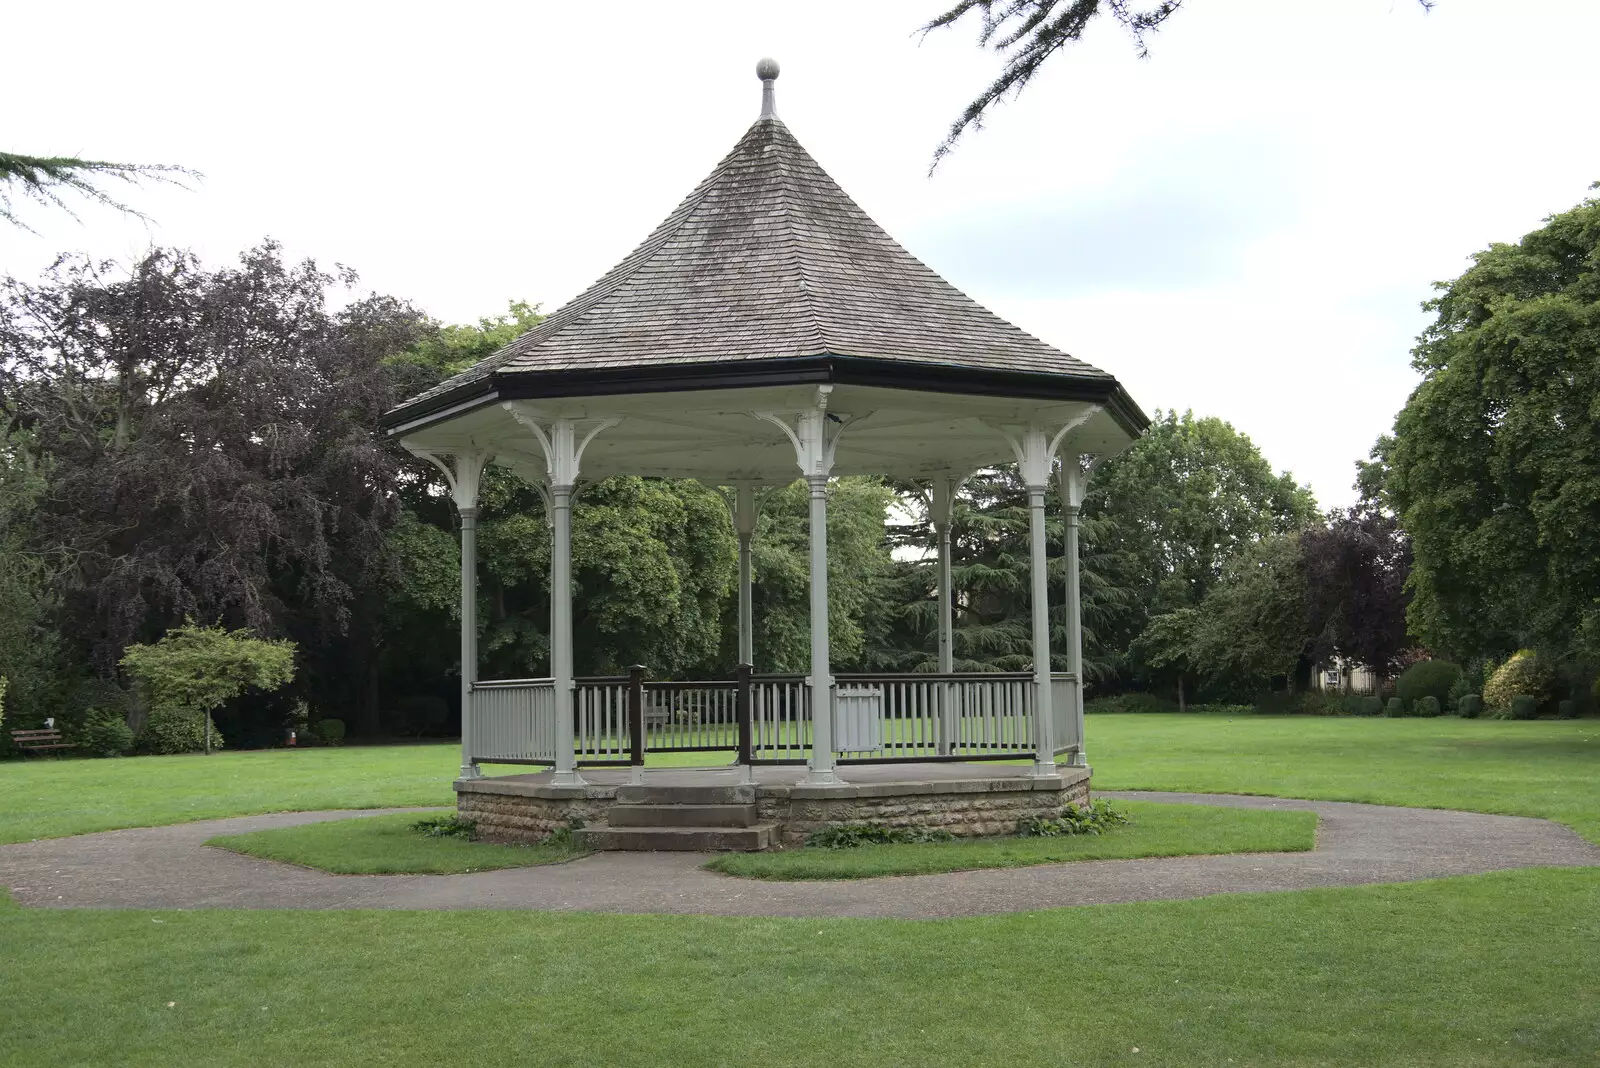 An empty band stand, from Pork Pies and Dockside Dereliction, Melton Mowbray and Liverpool - 7th August 2021